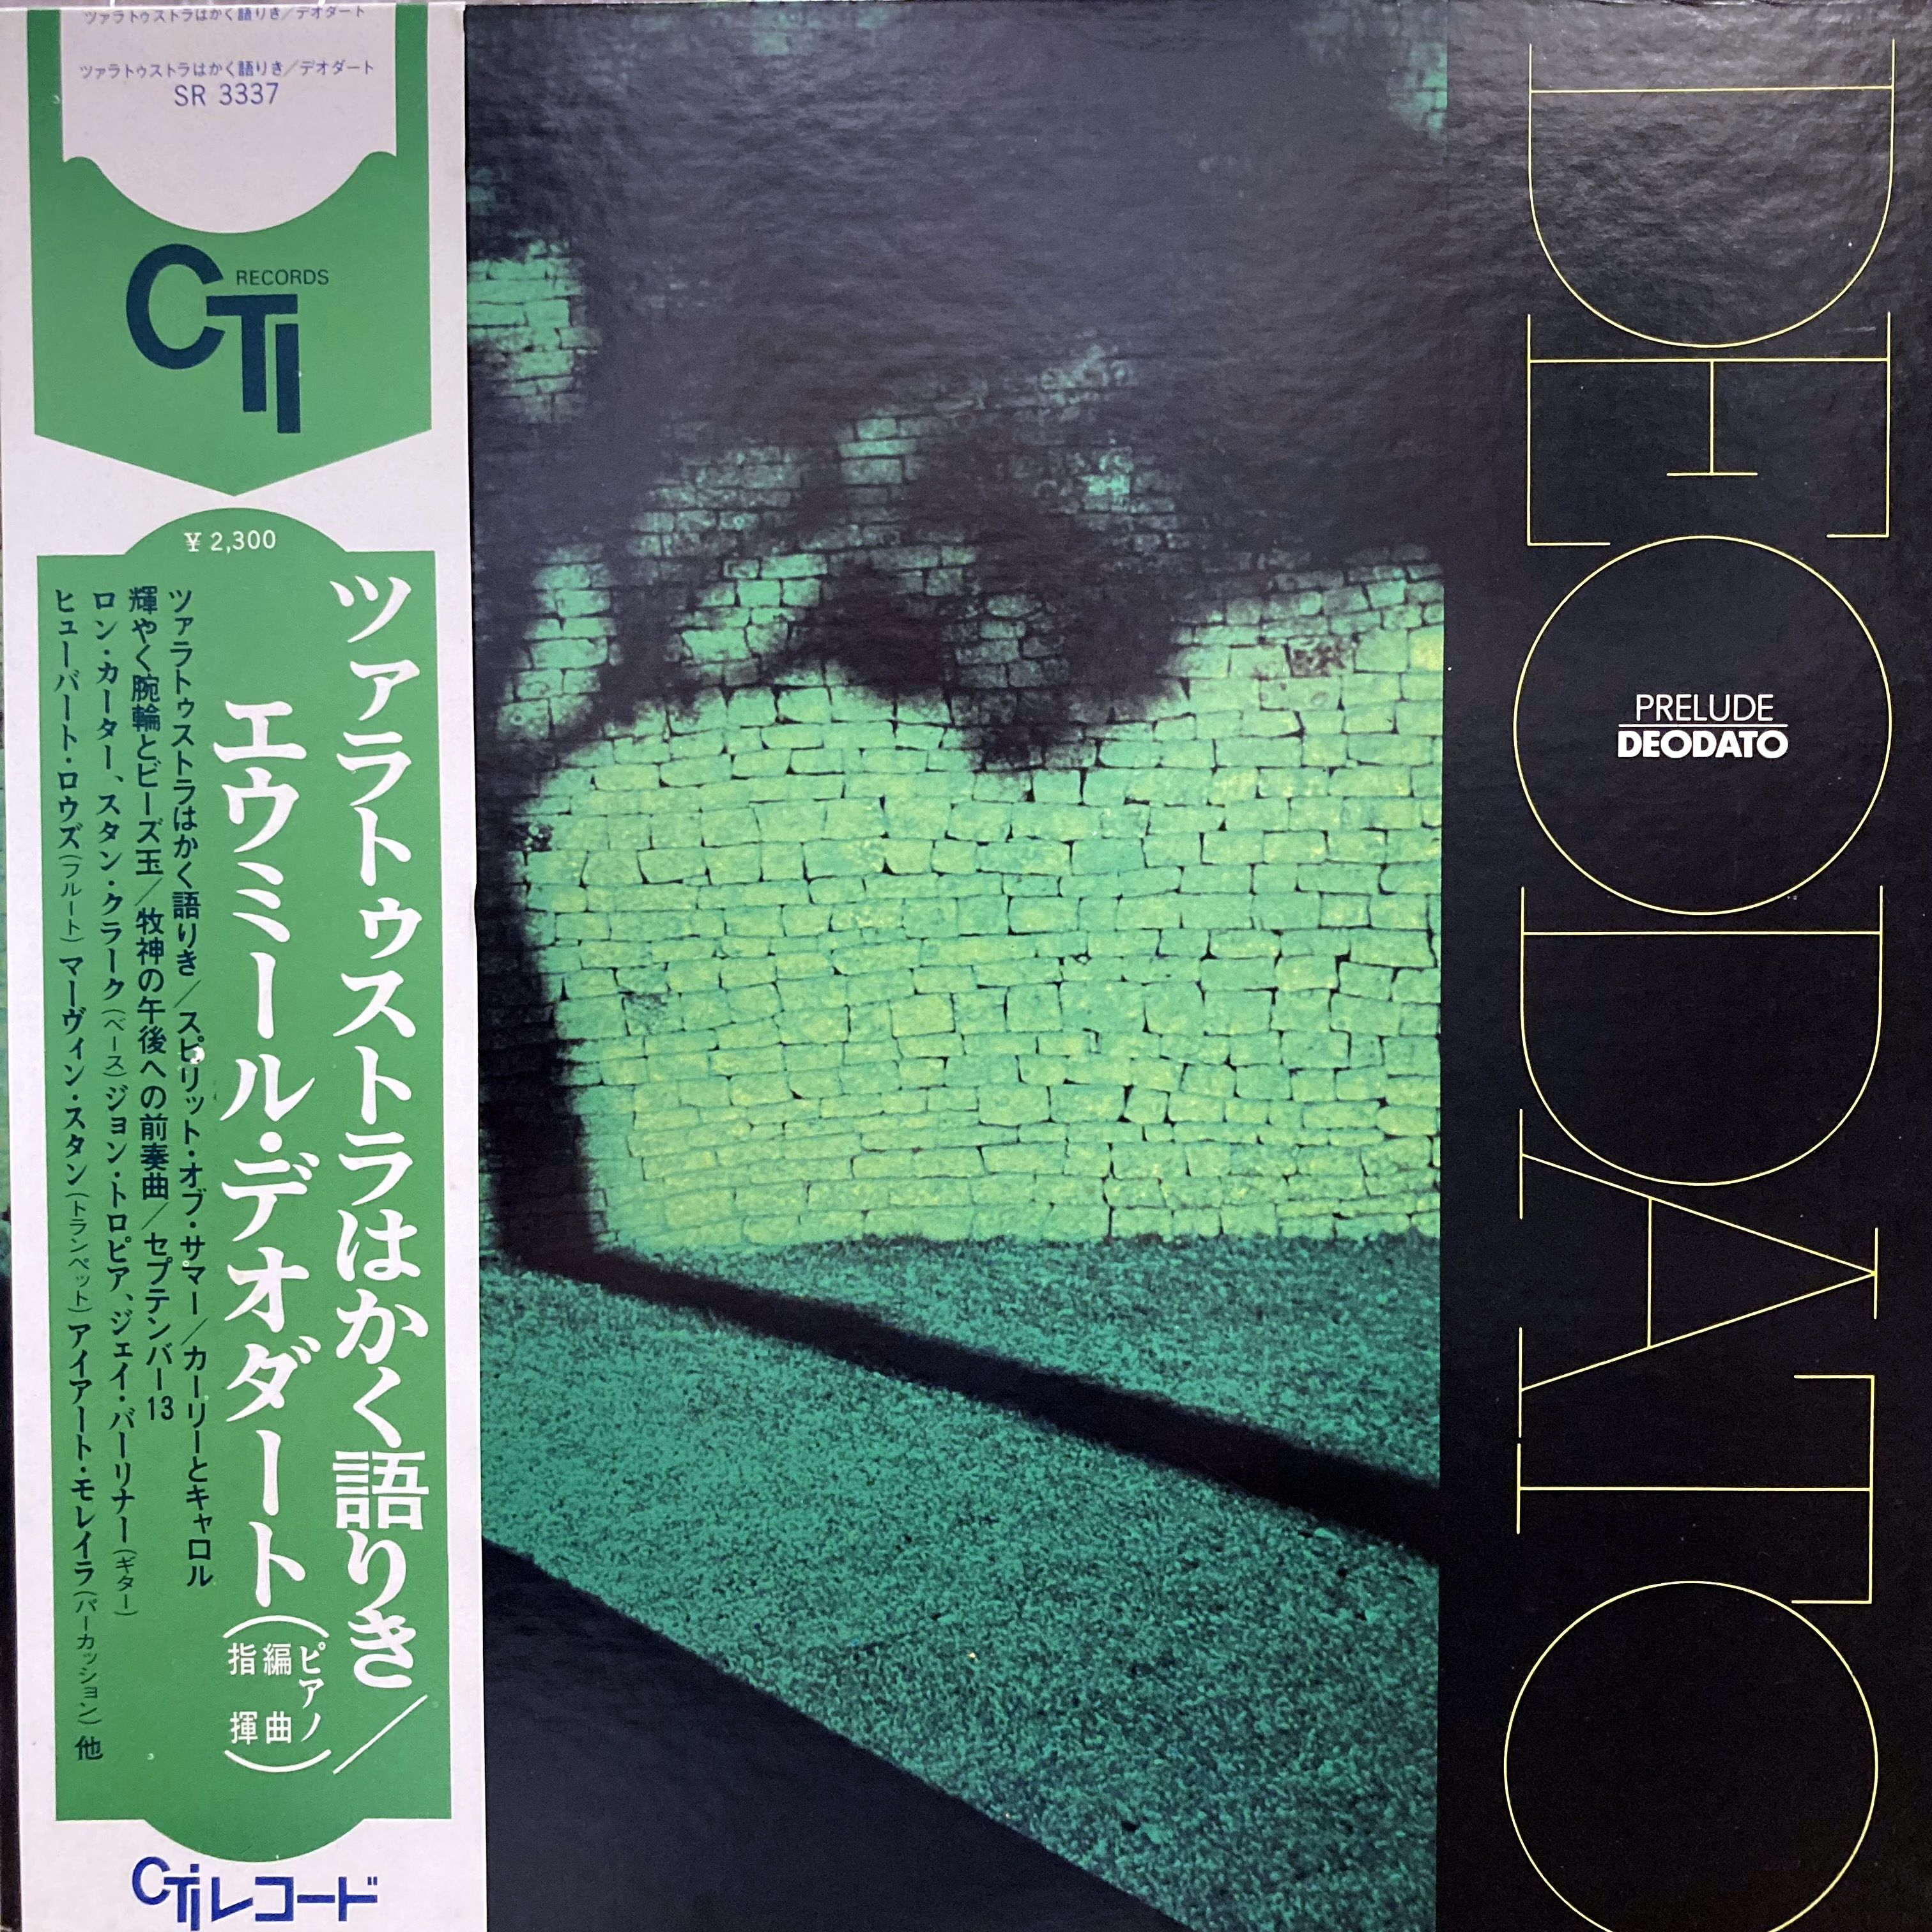 COCONUTS DISK WEBSTORE / Deodato / Prelude [Used LP]